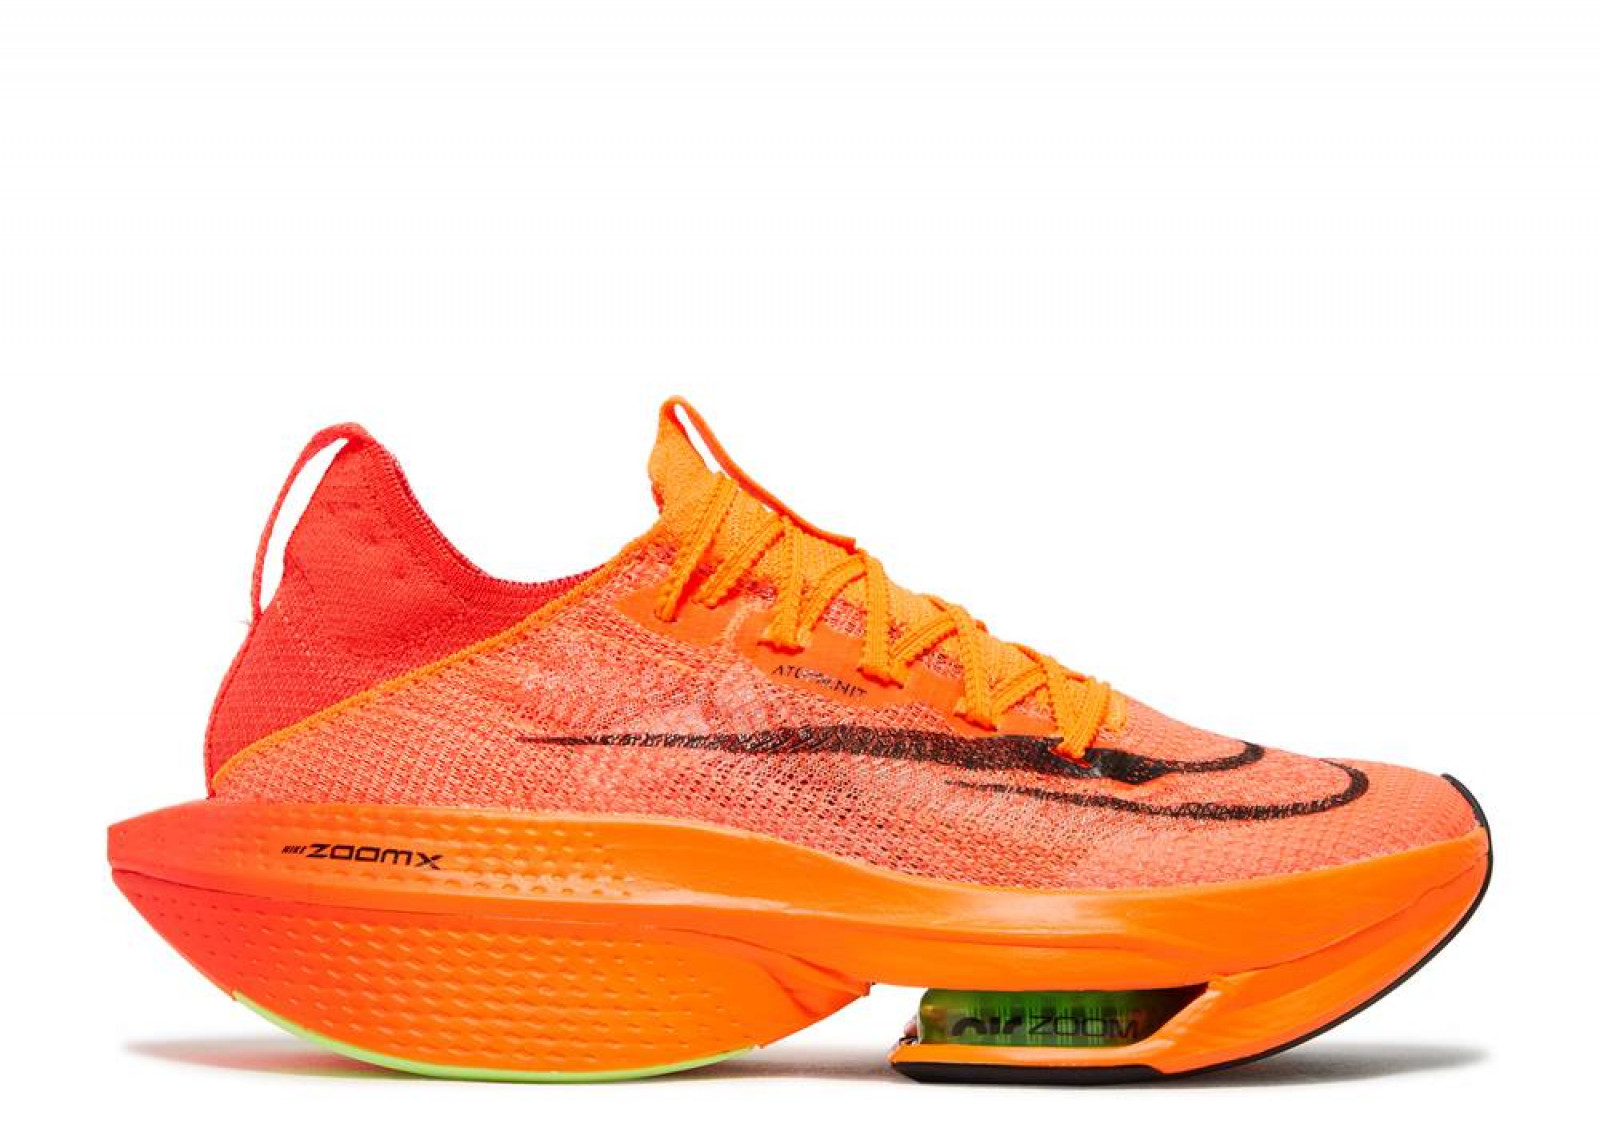 AIR ZOOM ALPHAFLY NEXT% 2 TOTAL ORANGE image 1